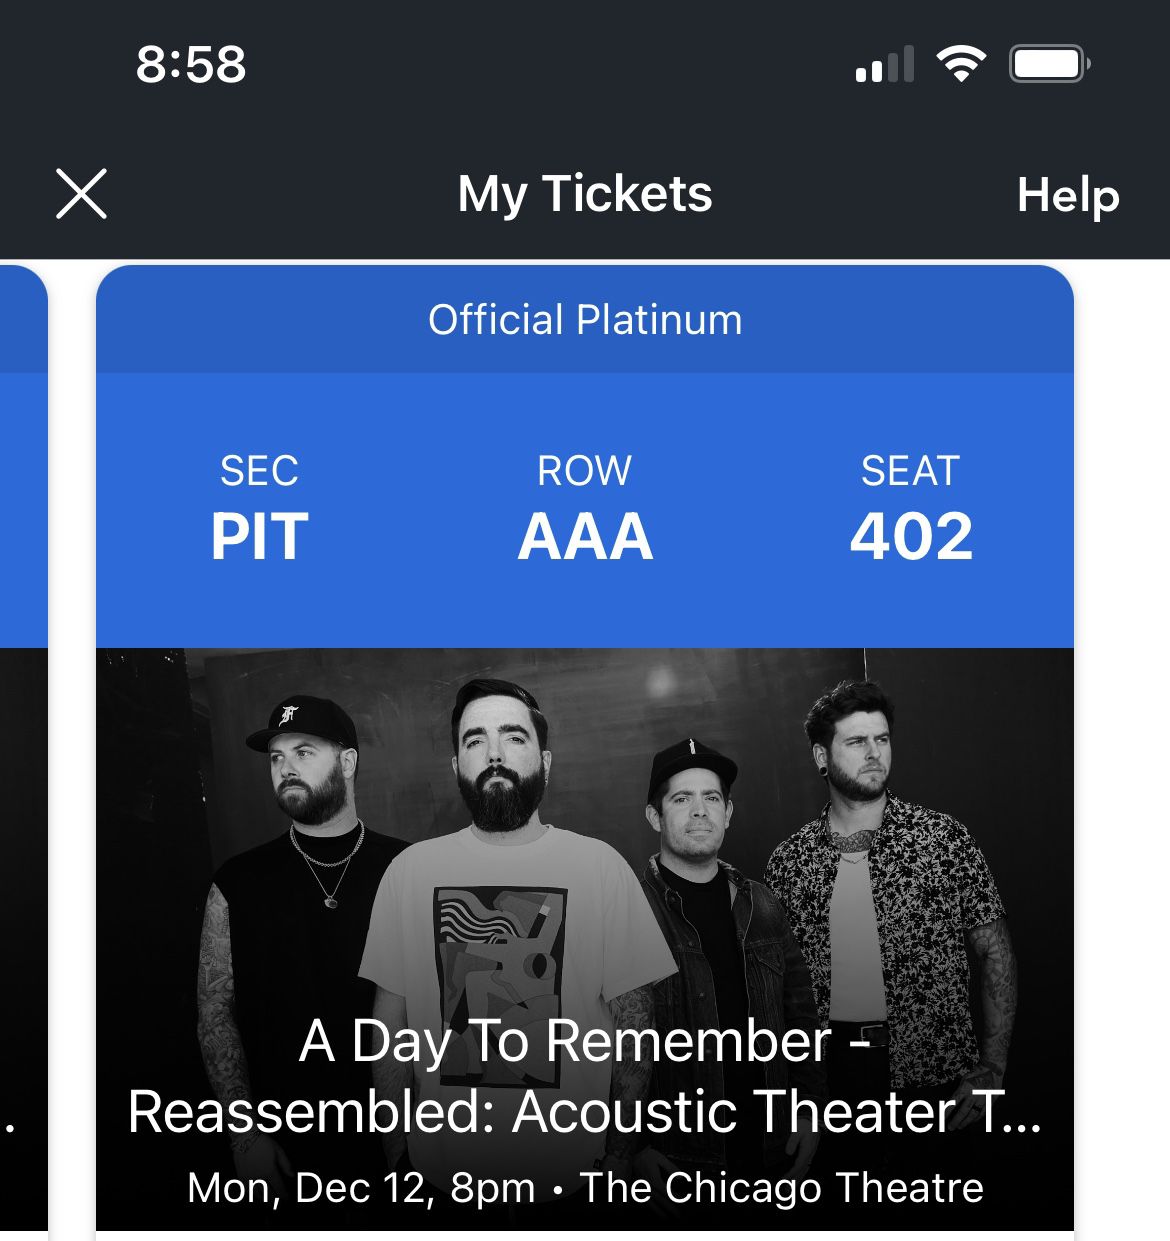 A Day To Remember Chicago Tickets